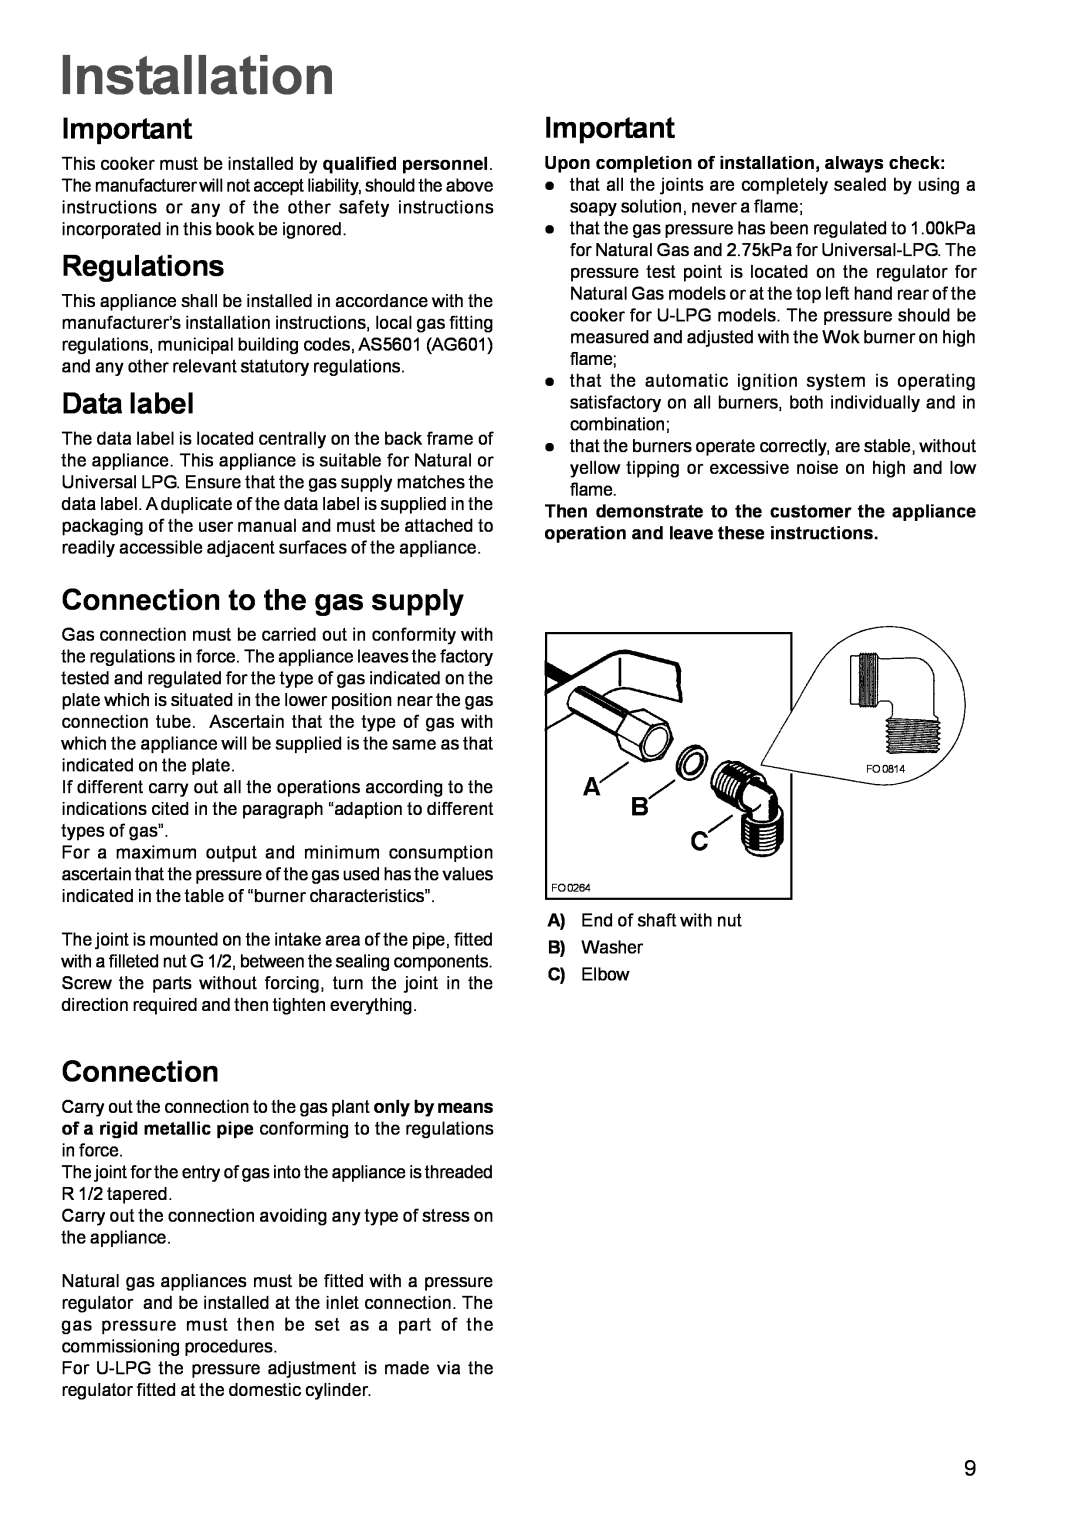 Zanussi ZGF 681 manual Installation, Regulations, Data label, Connection to the gas supply 